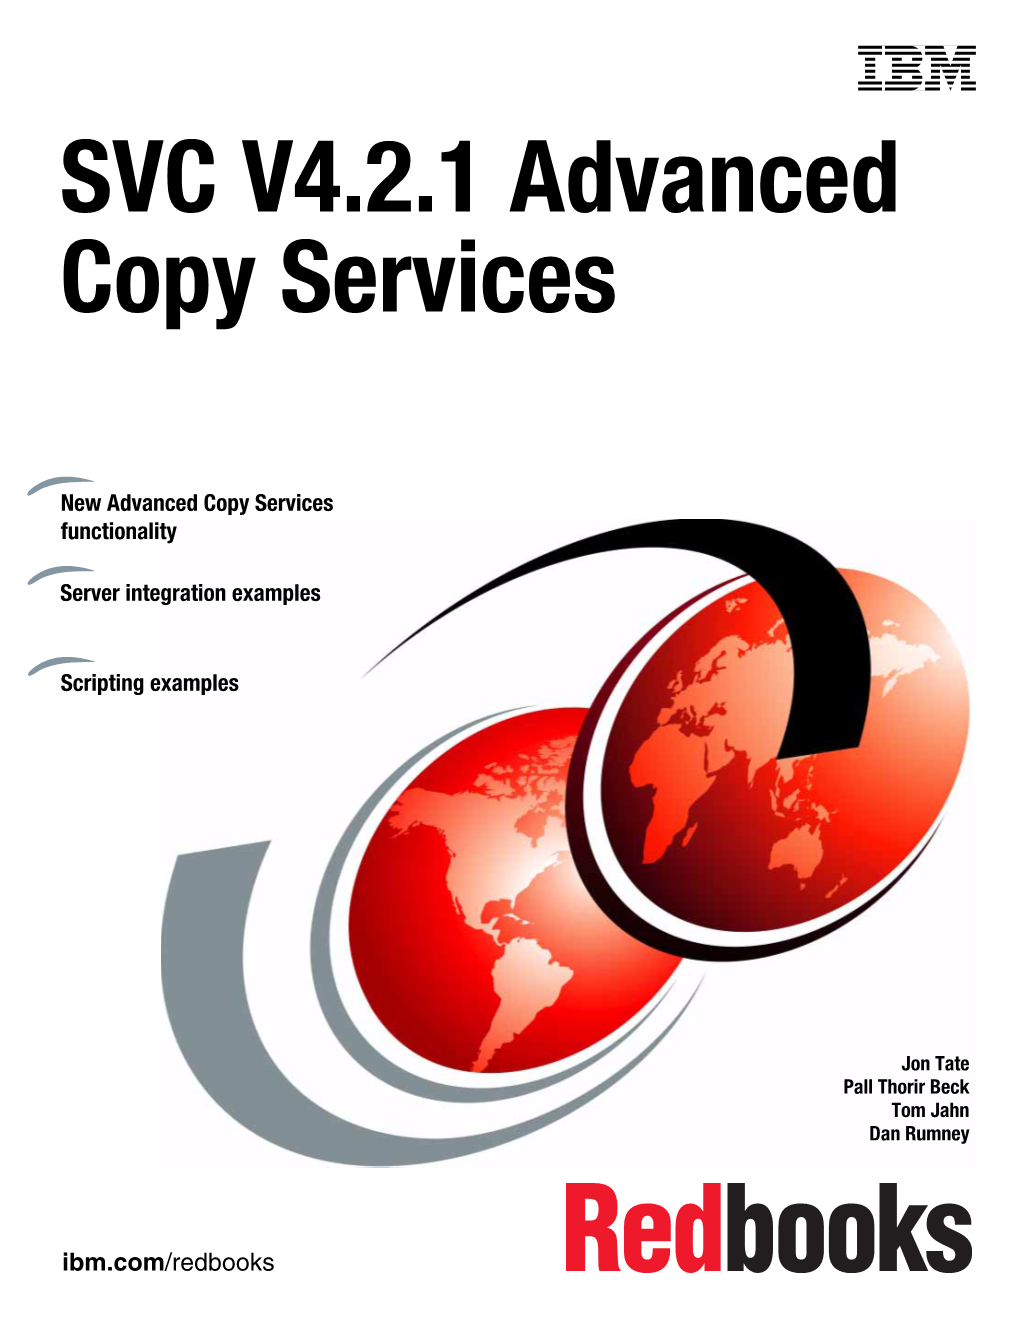 SVC 4.2.1 Advanced Copy Services 4.3.14 Deleting a Consistency Group